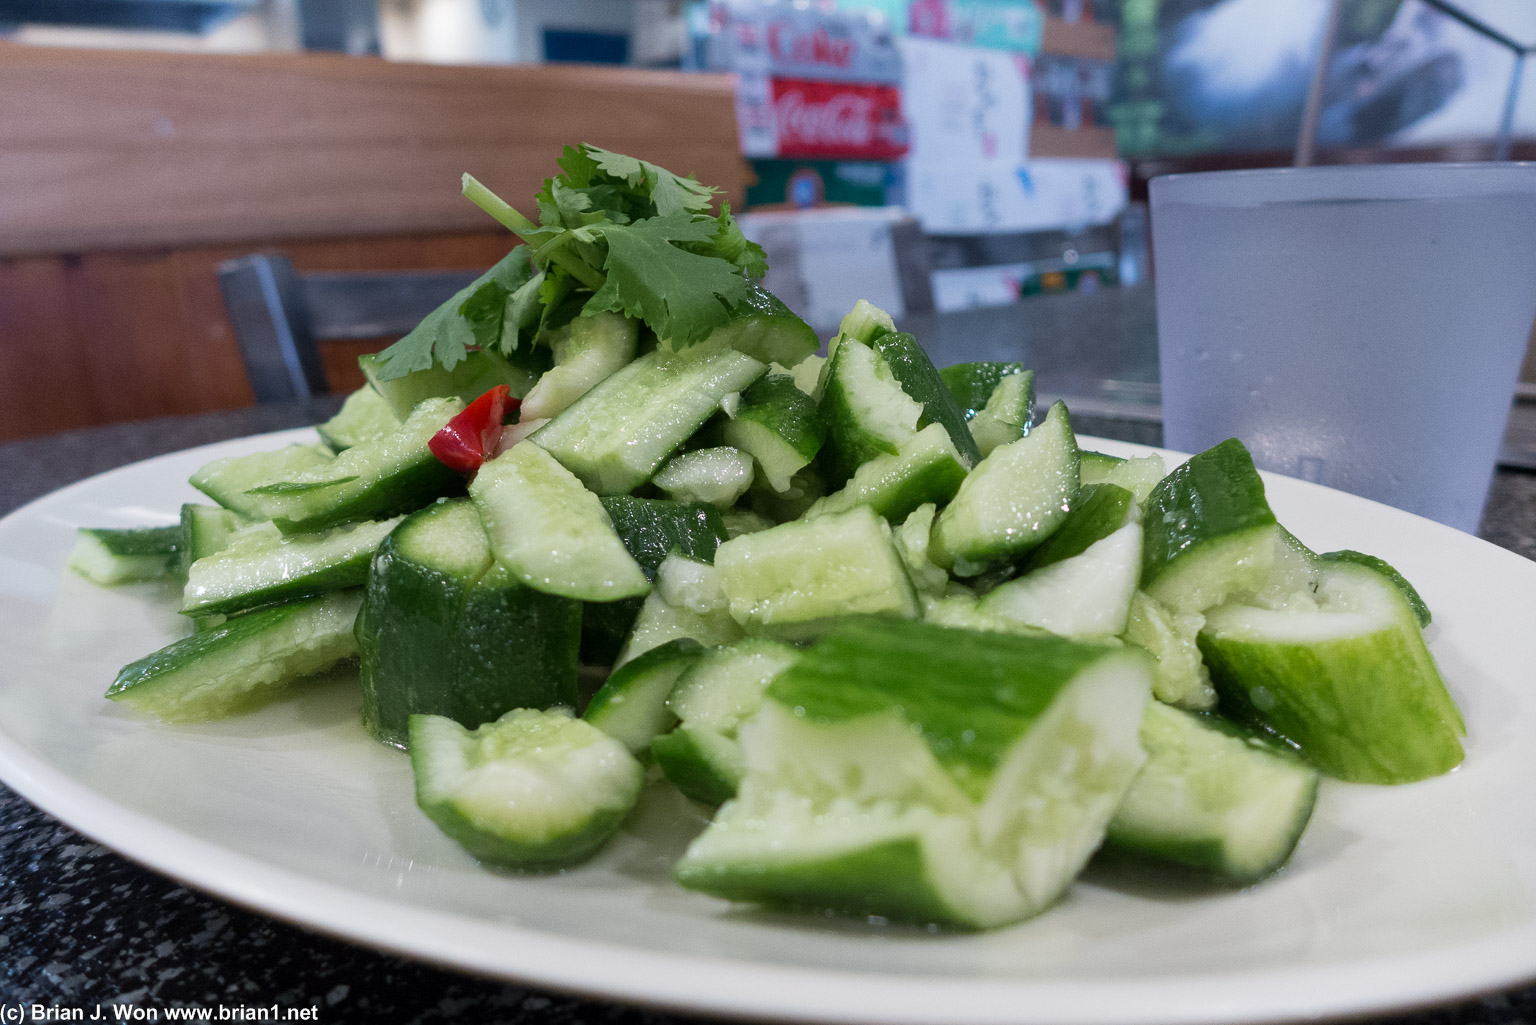 Cold cucumber. Just okay.